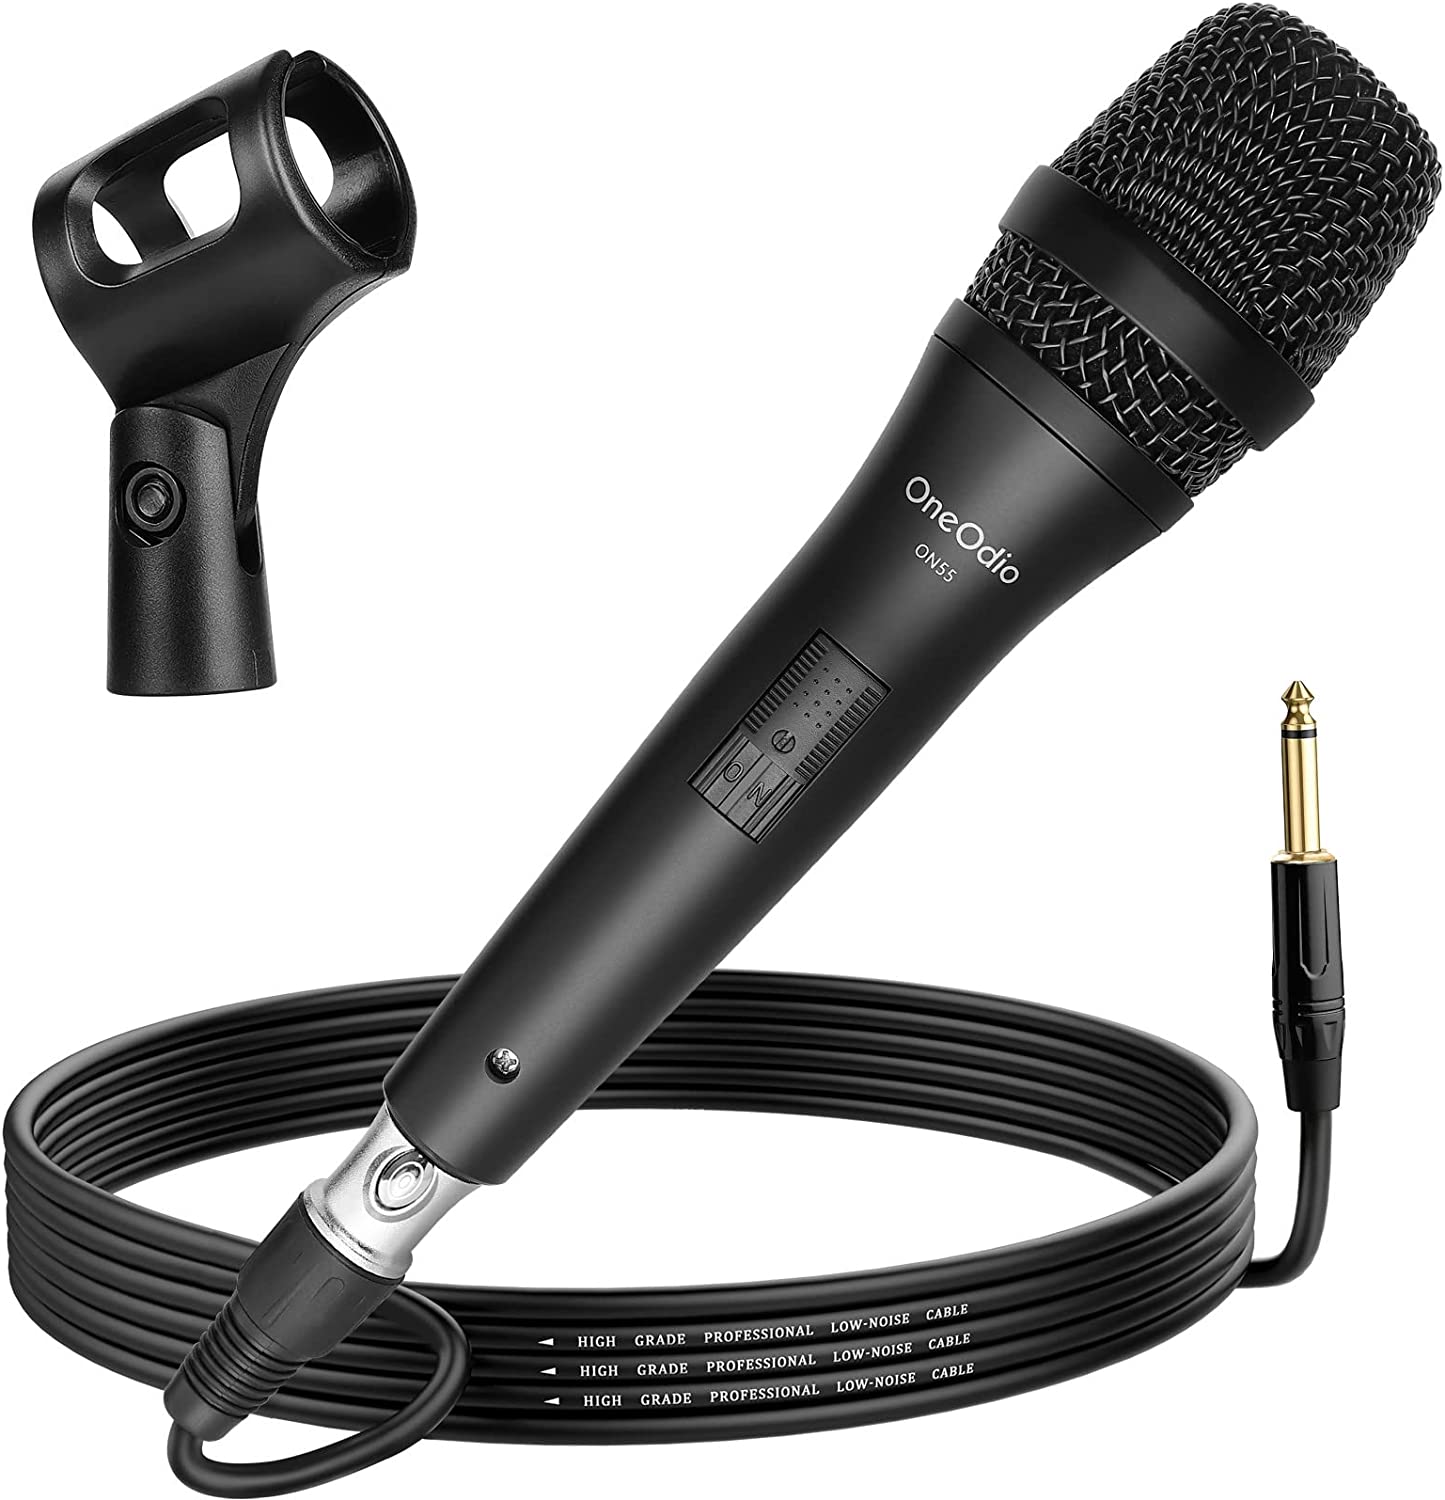 Live Vocal Speech Cardioid Handheld Microphone with On and Off Switch Includes 16.4ft AudioCable for Karaoke Dynamic Vocal Microphone 